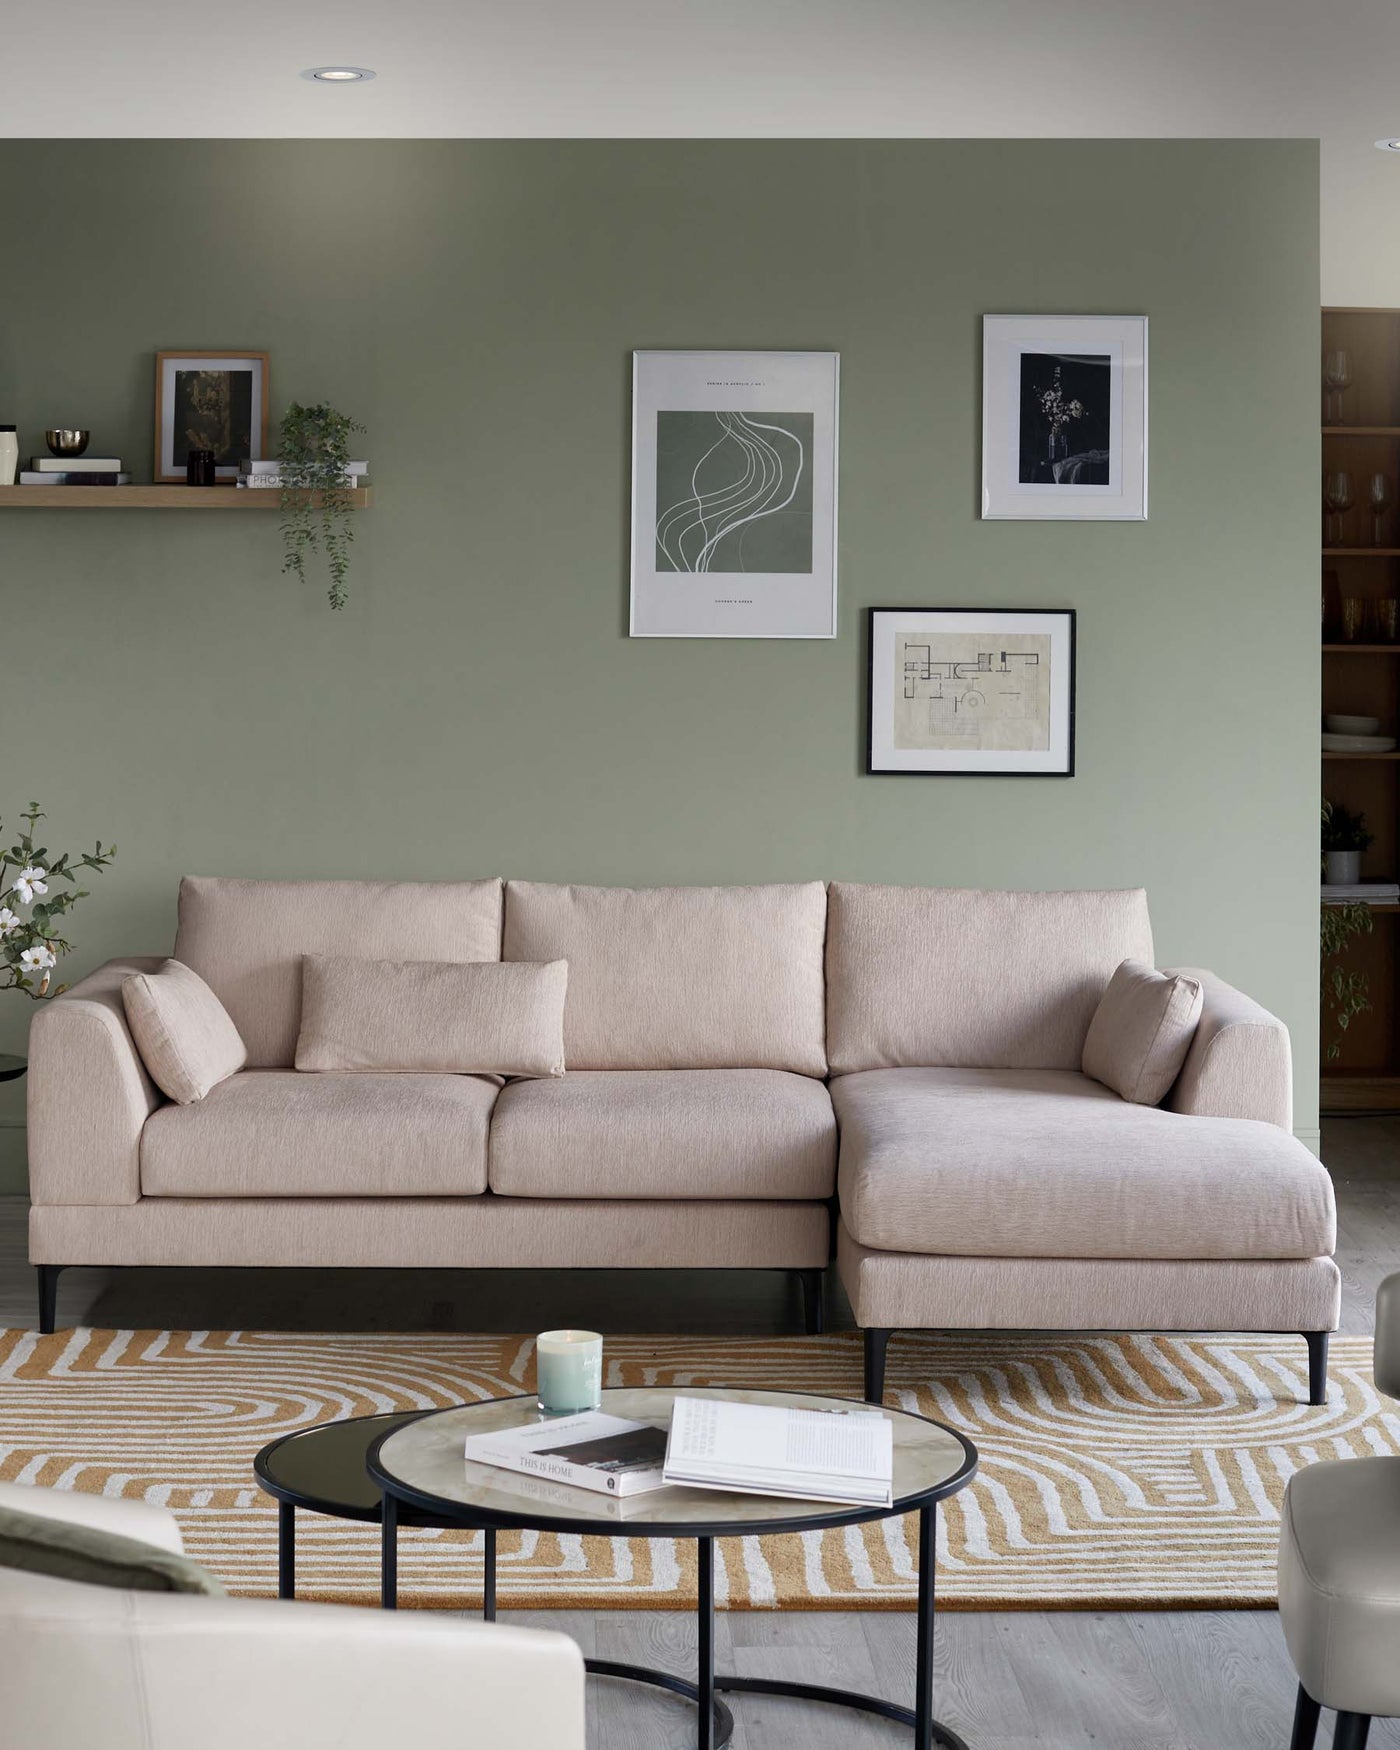 A contemporary beige sofa with a chaise lounge on the right side, upholstered in a textured fabric, featuring a low backrest with three loose back cushions, and an angled armrest on the left. The sofa legs are slim and black, providing a subtle contrast. In front of the sofa stands a round, black metal coffee table with a glossy tabletop, upon which rest a candle, two books, and a mug. The setting is complemented by a beige and yellow patterned area rug beneath the table.